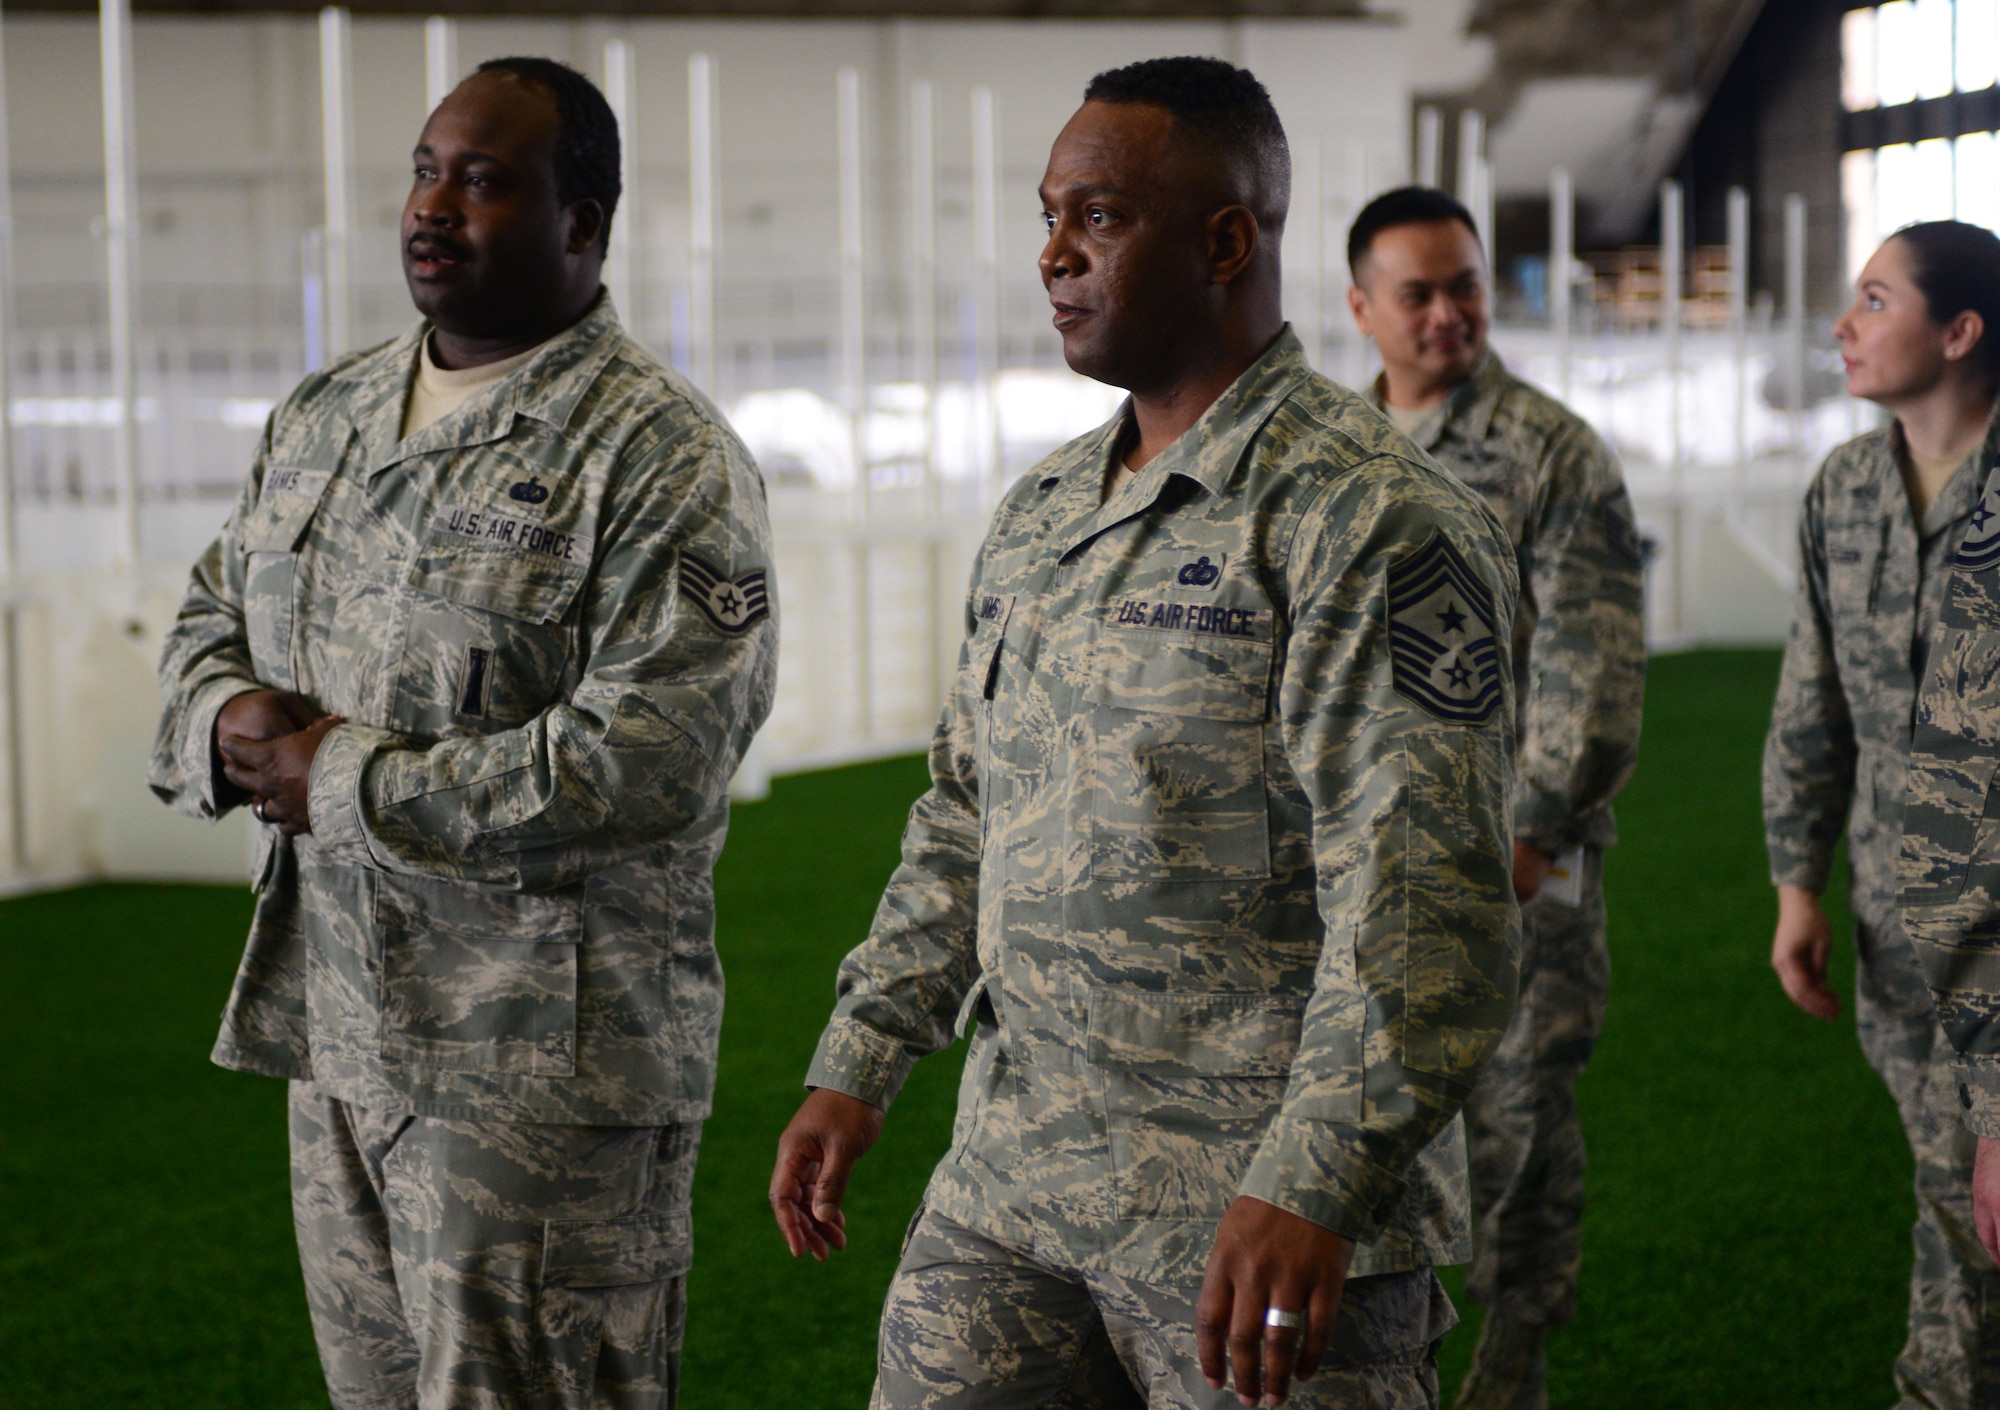 Staff Sgt. Adrian Banks, the Bellamy Fitness Center facility supervisor assigned to the 28th Force Support Squadron, escorts Chief Master Sgt. Calvin Williams, Air Force Global Strike Command command chief, through the Pride Hangar during a visit to Ellsworth Air Force Base, S.D., March 2, 2017. Banks explained the recent updates to the Pride Hangar, including a new indoor soccer field, batting areas and improved lighting. (U.S. Air Force photo by Airman 1st Class Denise M. Jenson)